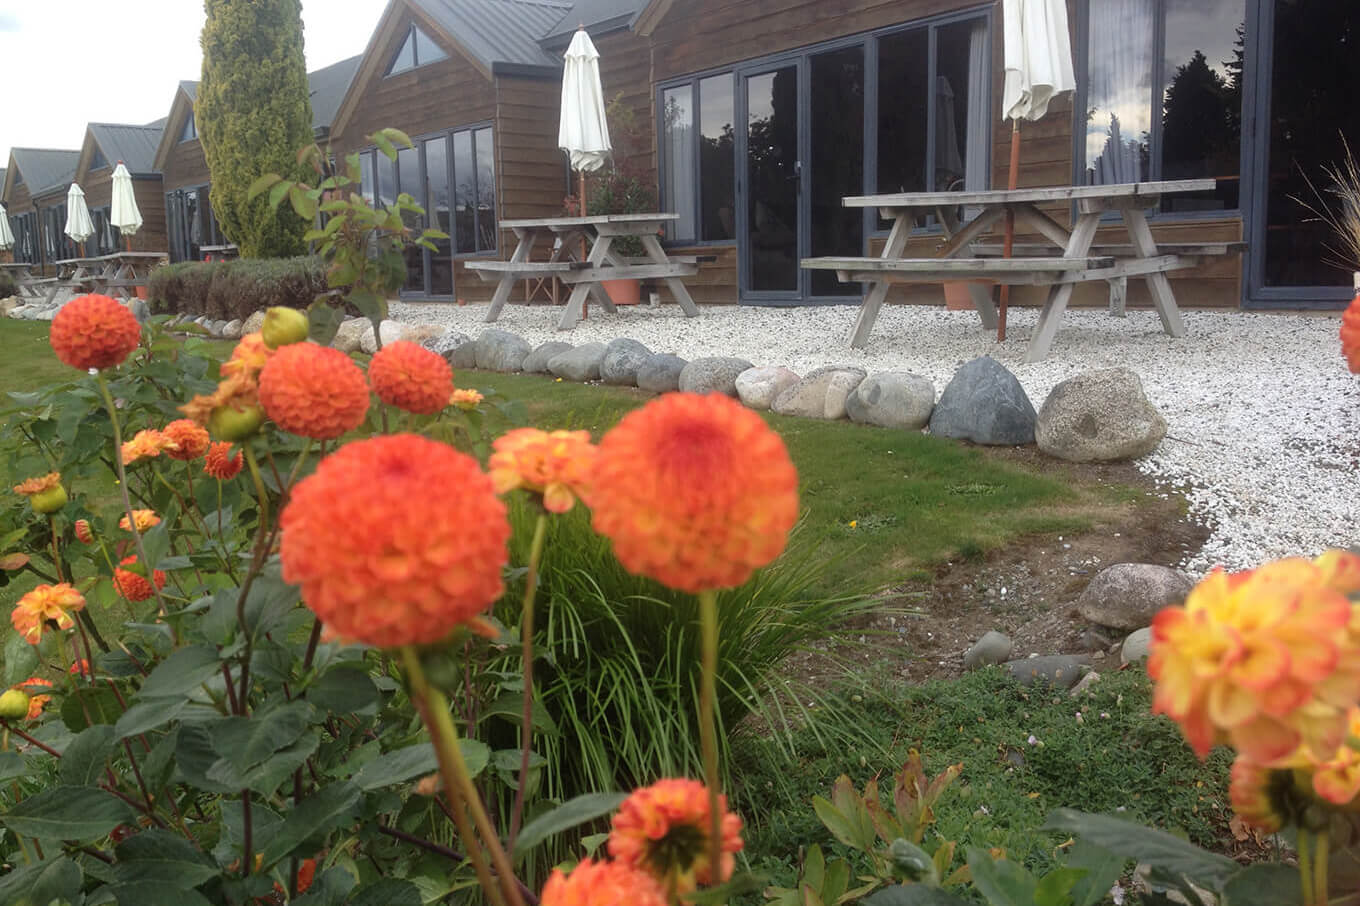 View of seating area outside Lakefront Lodge with orange dahlias in foreground